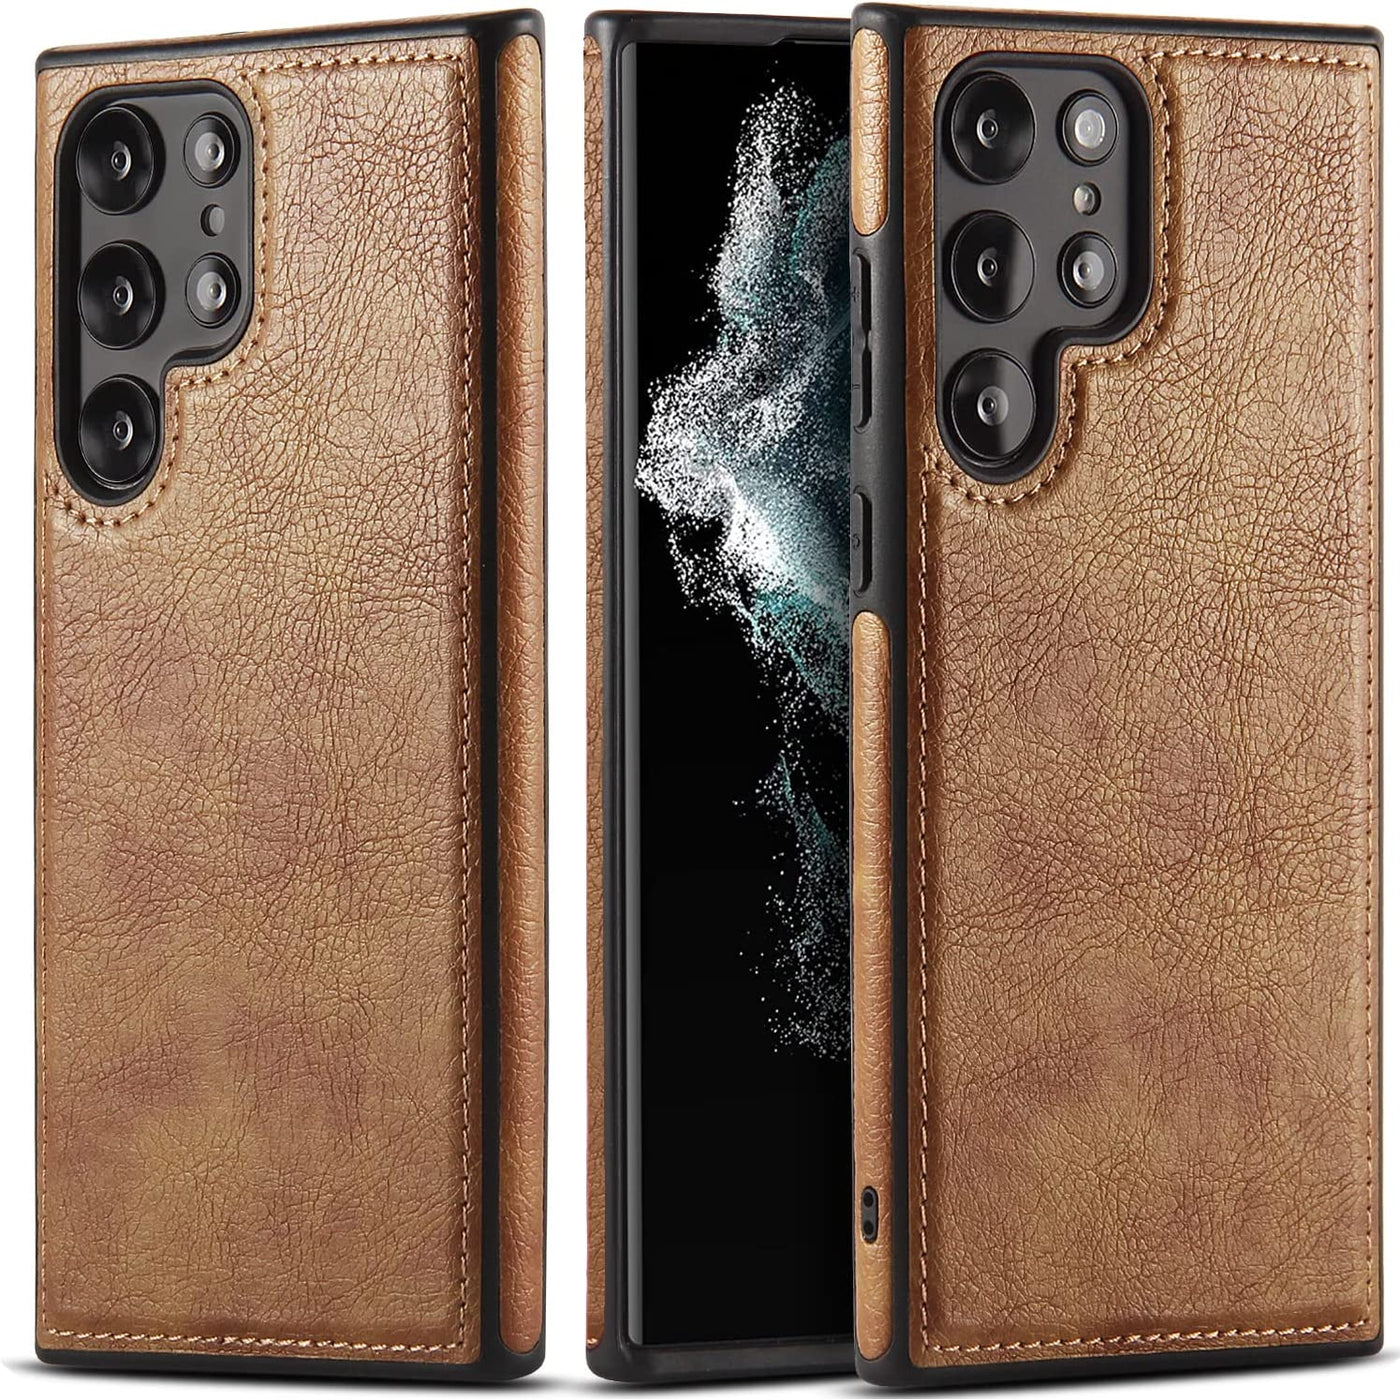 Samsung Galaxy S22 Ultra Brown color leather back cover case